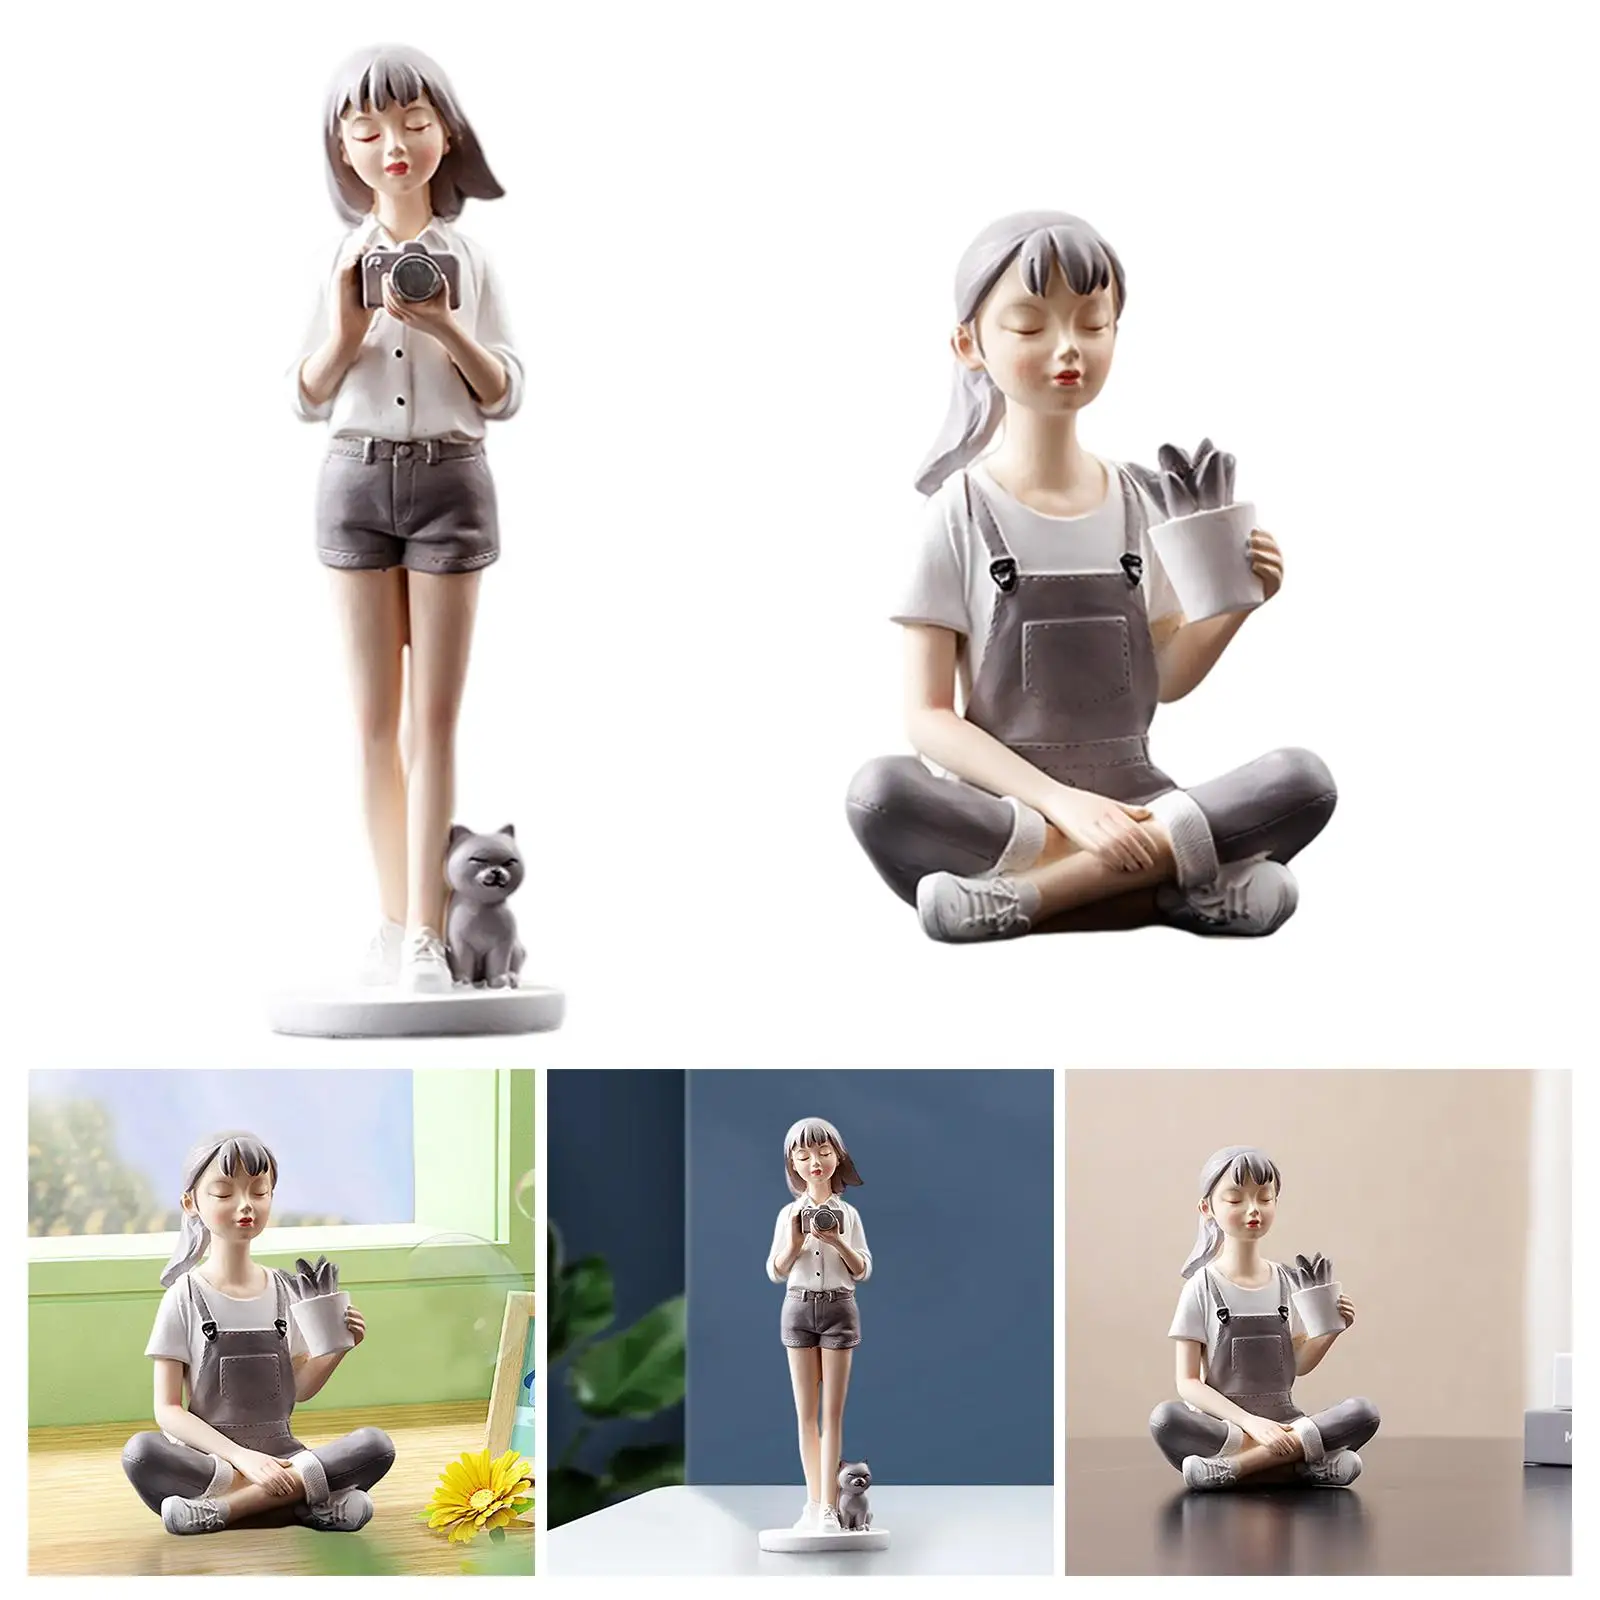 Nordic Maiden Ornament Sculpture Resin Modern Decorative Girl Figurine Statue for Dining Room Shelf Bedroom Gift Home Decoration